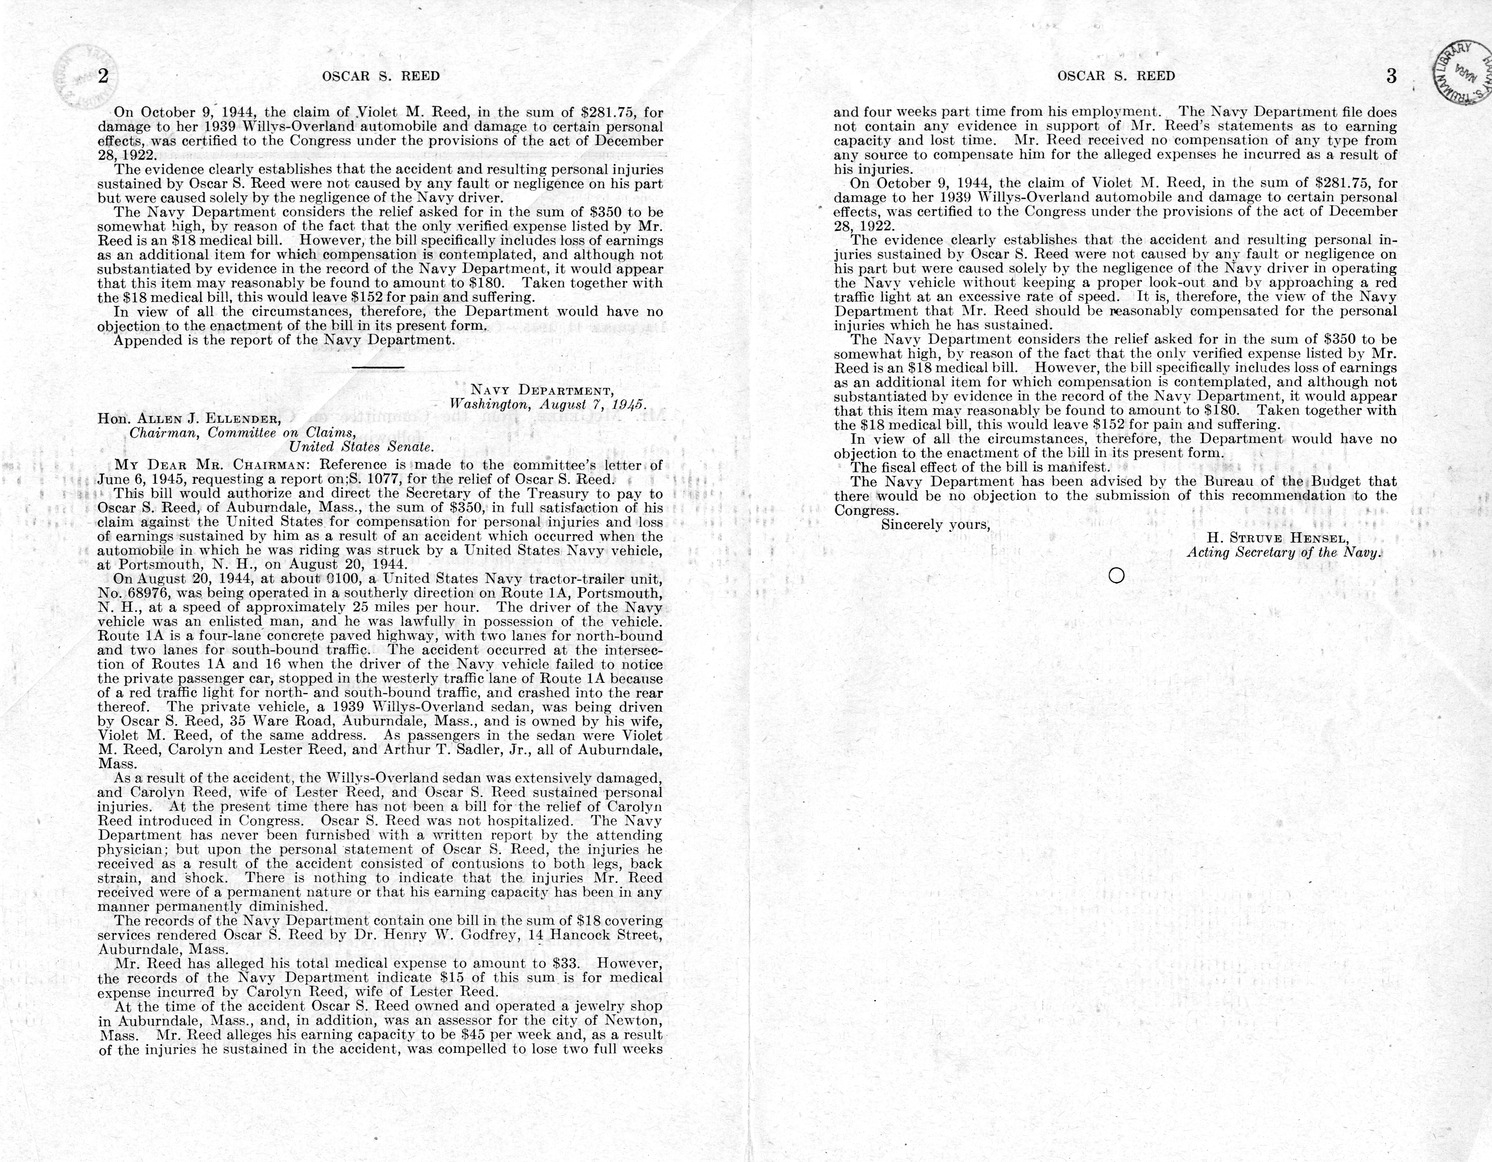 Memorandum from Frederick J. Bailey to M. C. Latta, S. 1077, For the Relief of Oscar S. Reed, with Attachments